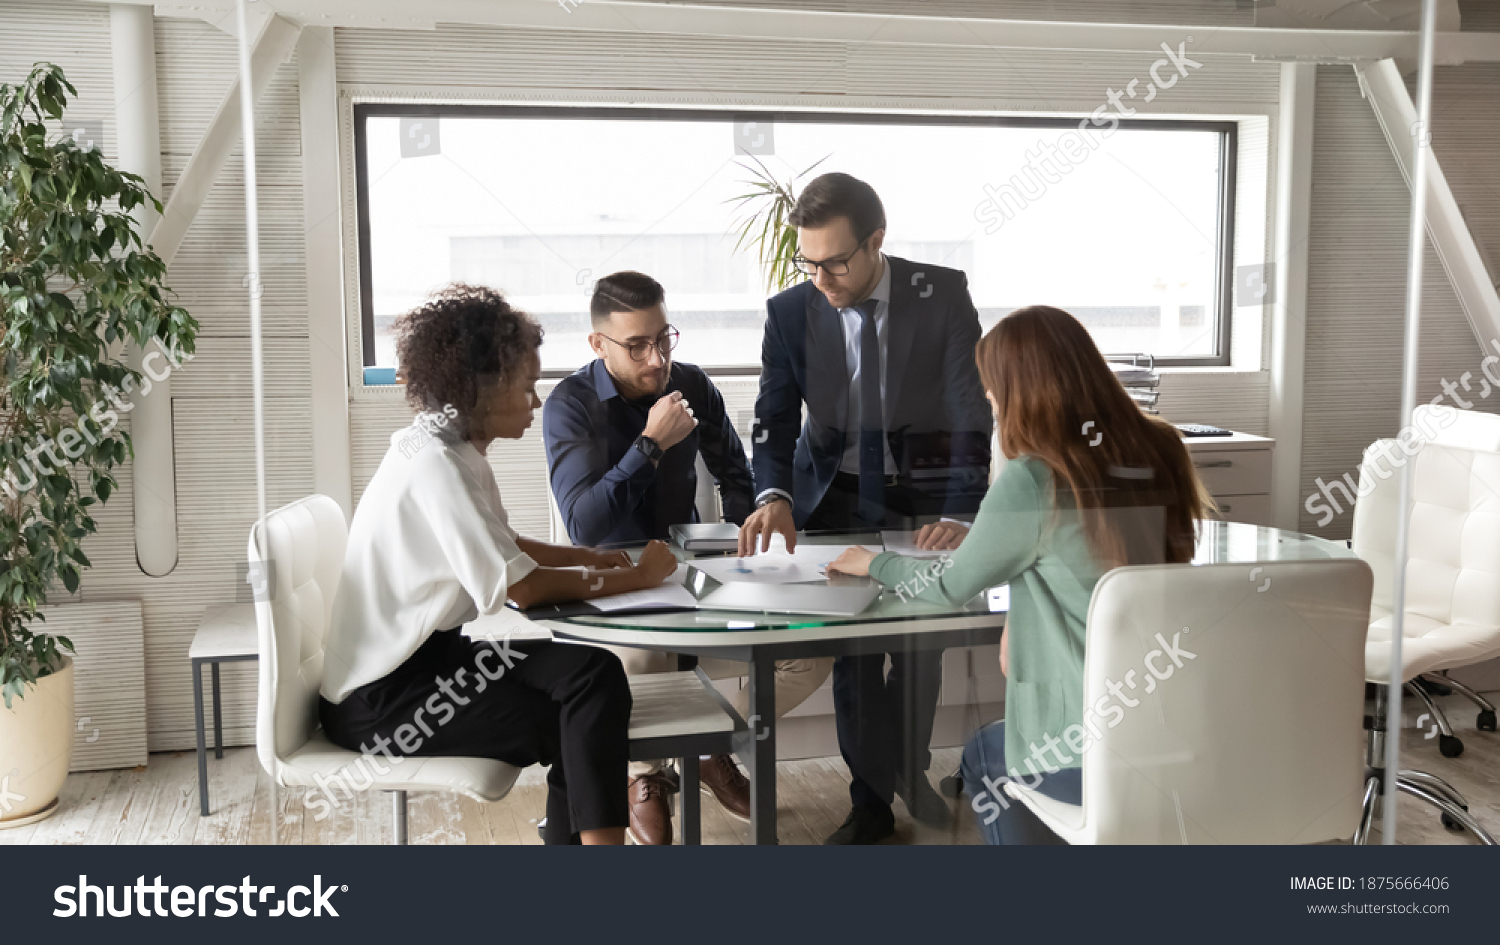 Multiracial businesspeople talk brainstorm discuss company financial statistics document at team meeting in office. Motivated multiethnic colleagues gather in boardroom consider paperwork at briefing. #1875666406